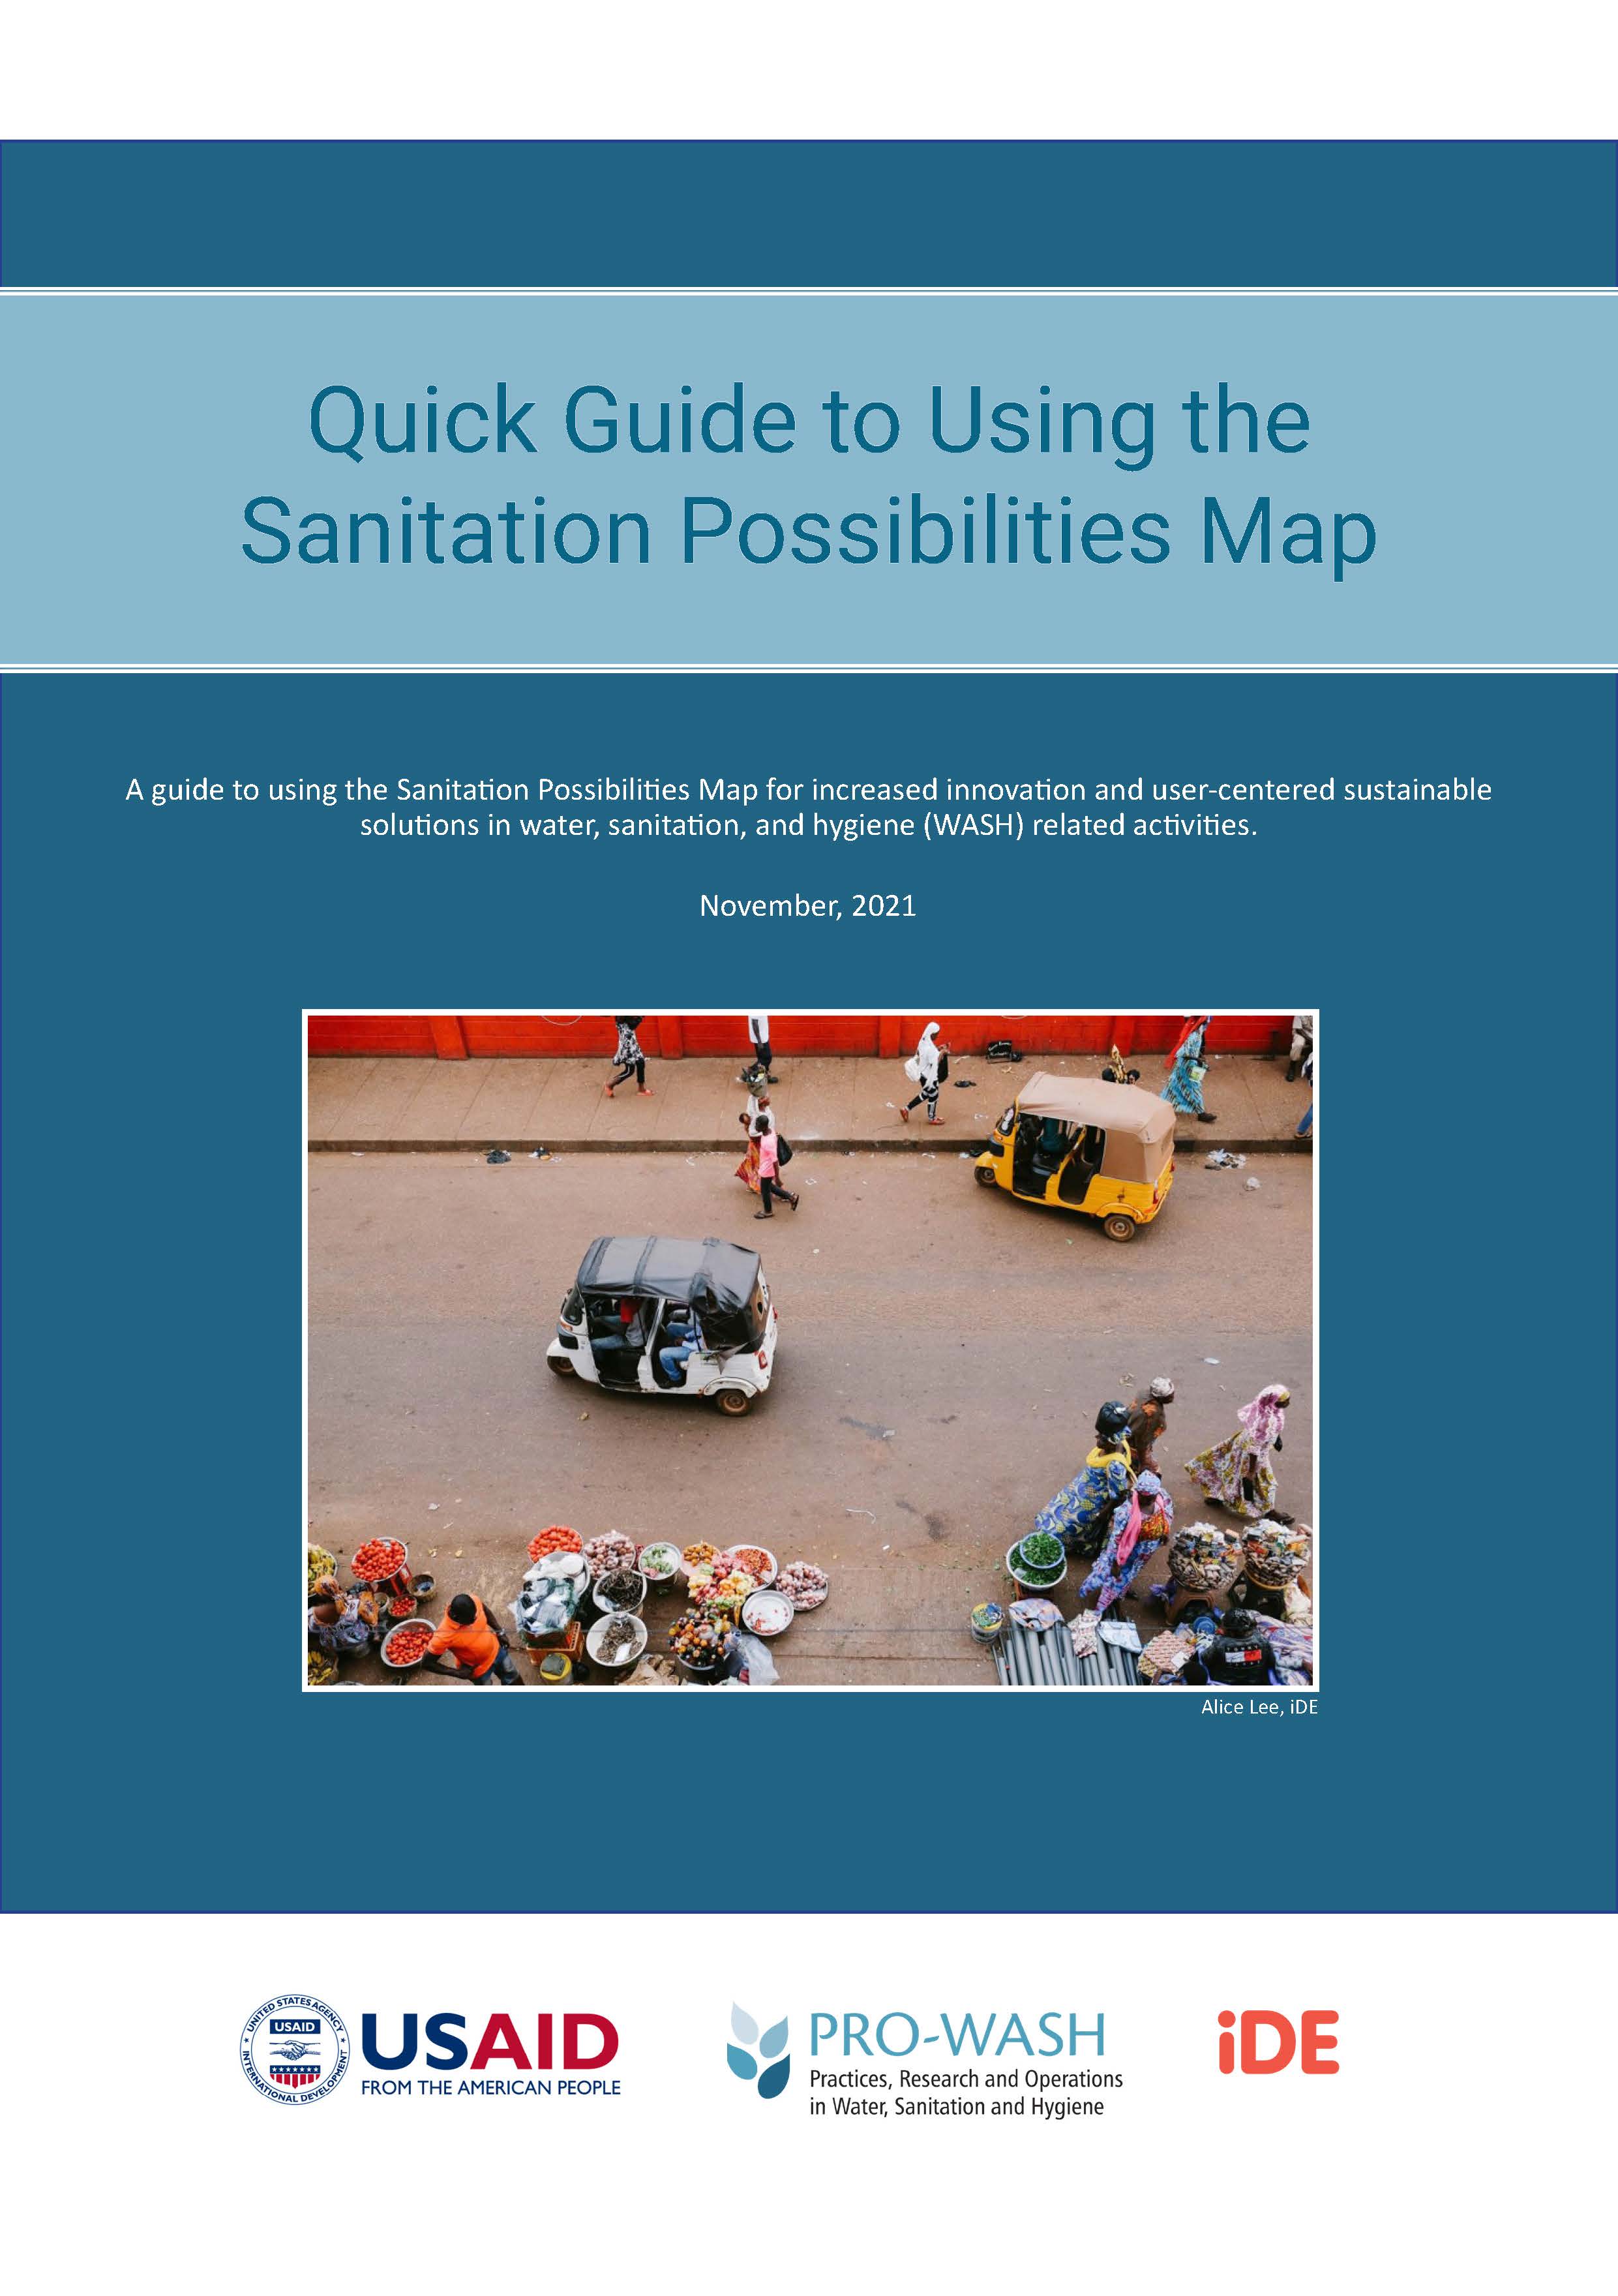 Cover-page for Sanitation Possibilities Map